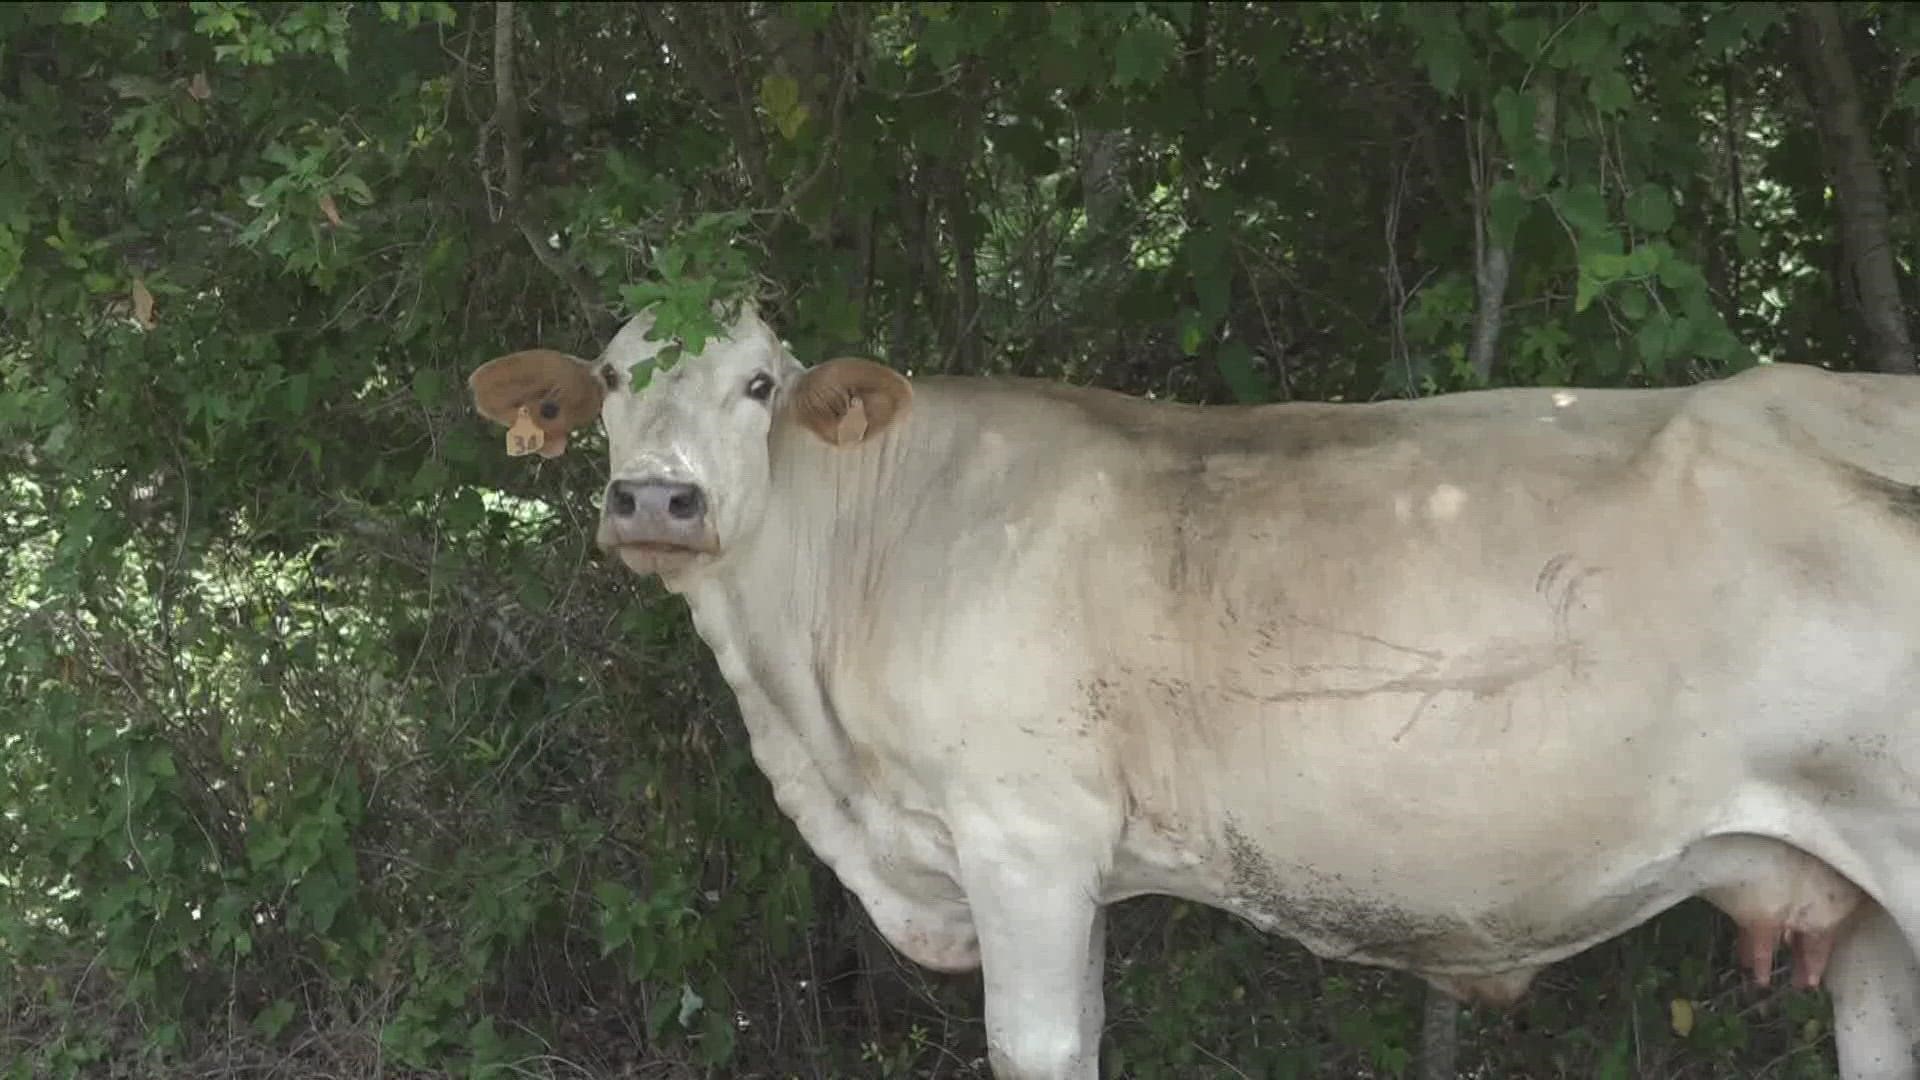 A local rancher describes how he's keeping his cattle cool while also managing rising prices.